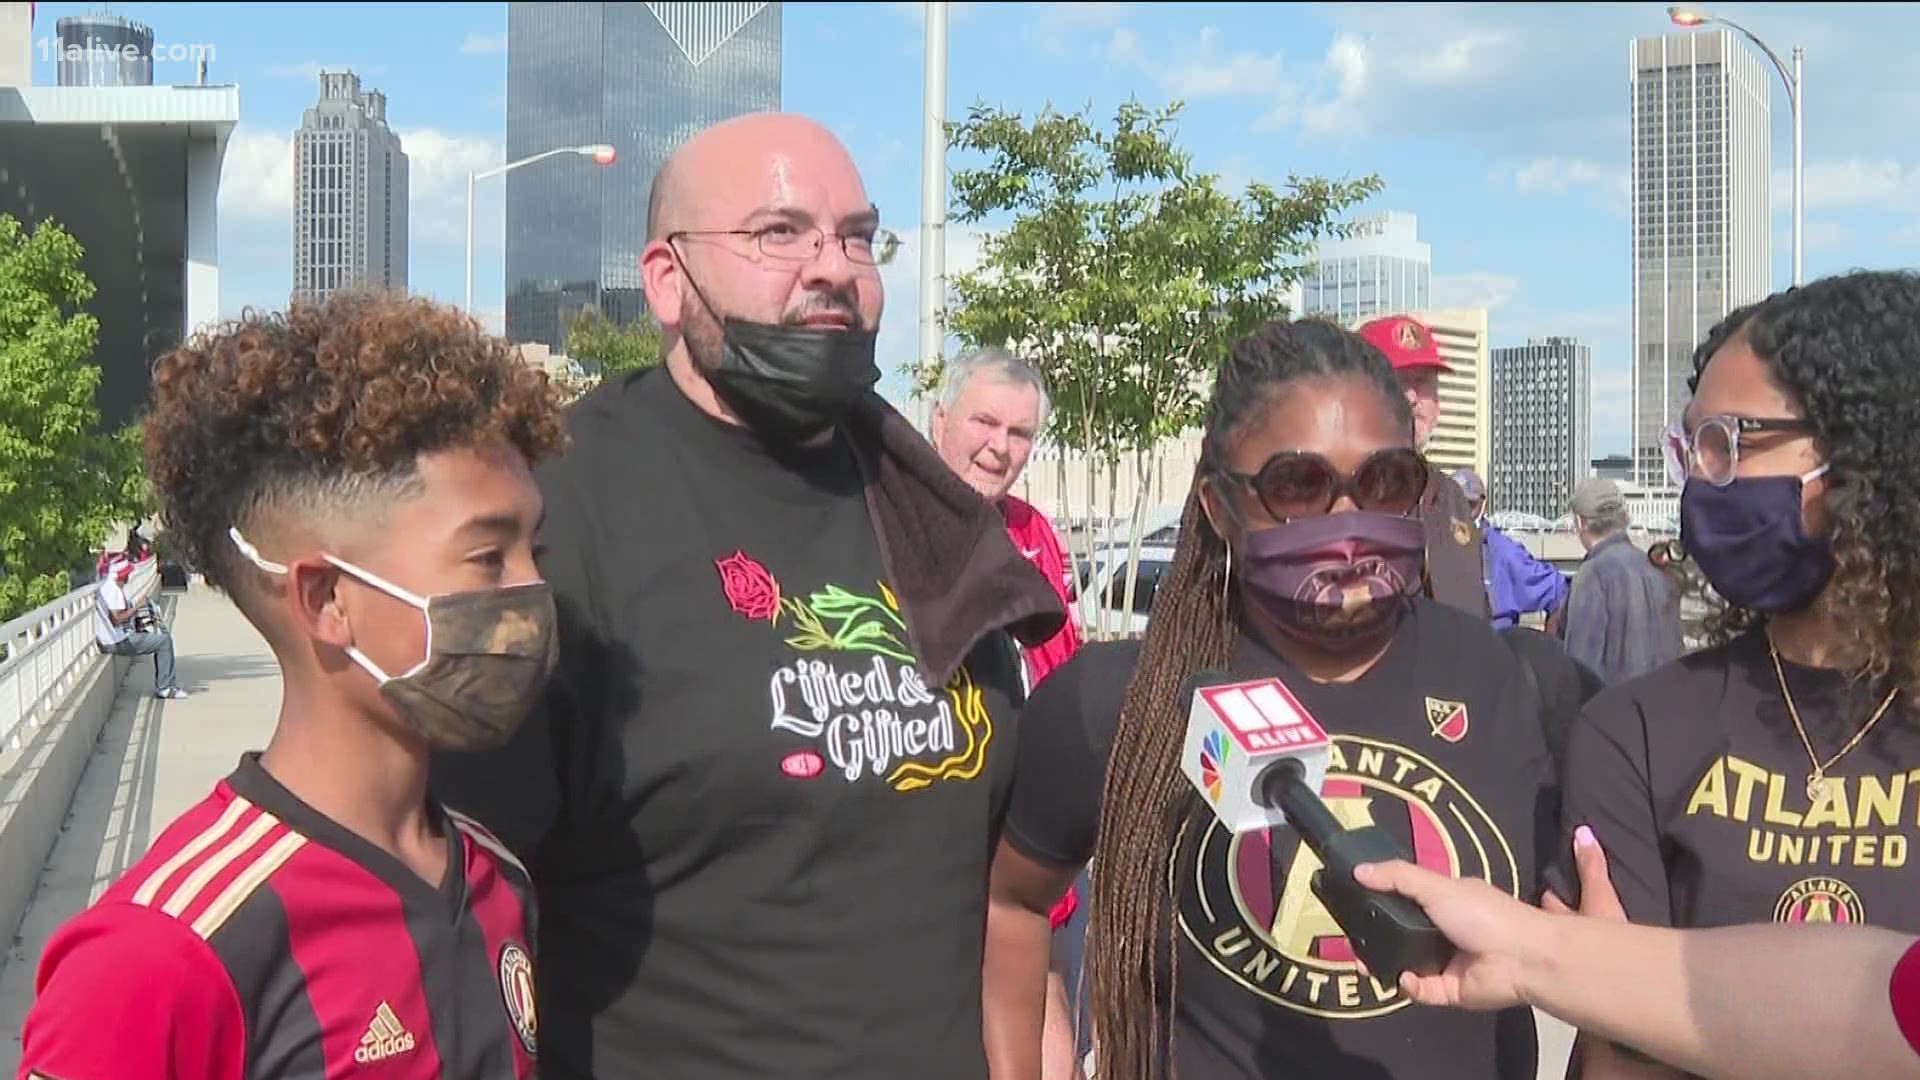 Outside of Mercedes Benz Stadium Saturday, Atlanta United fans showed out excited to see their team and to be in a full-capacity stadium again.